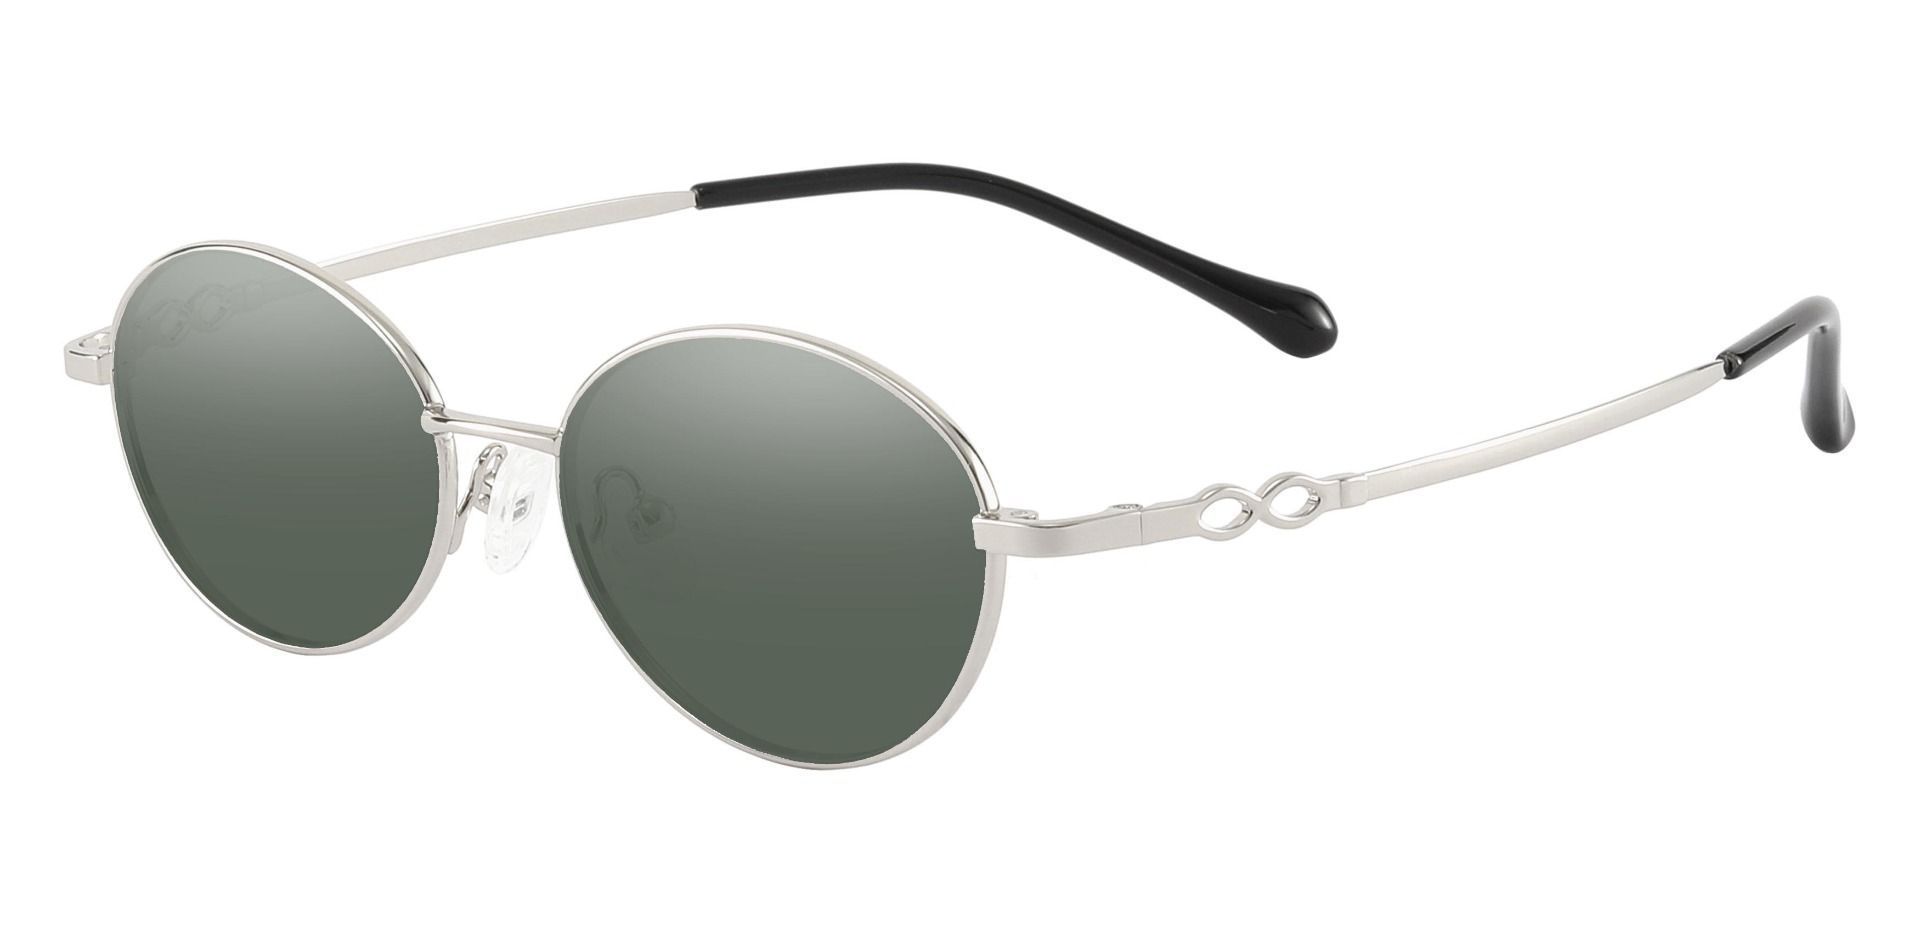 Odyssey Oval Reading Sunglasses - Silver Frame With Green Lenses